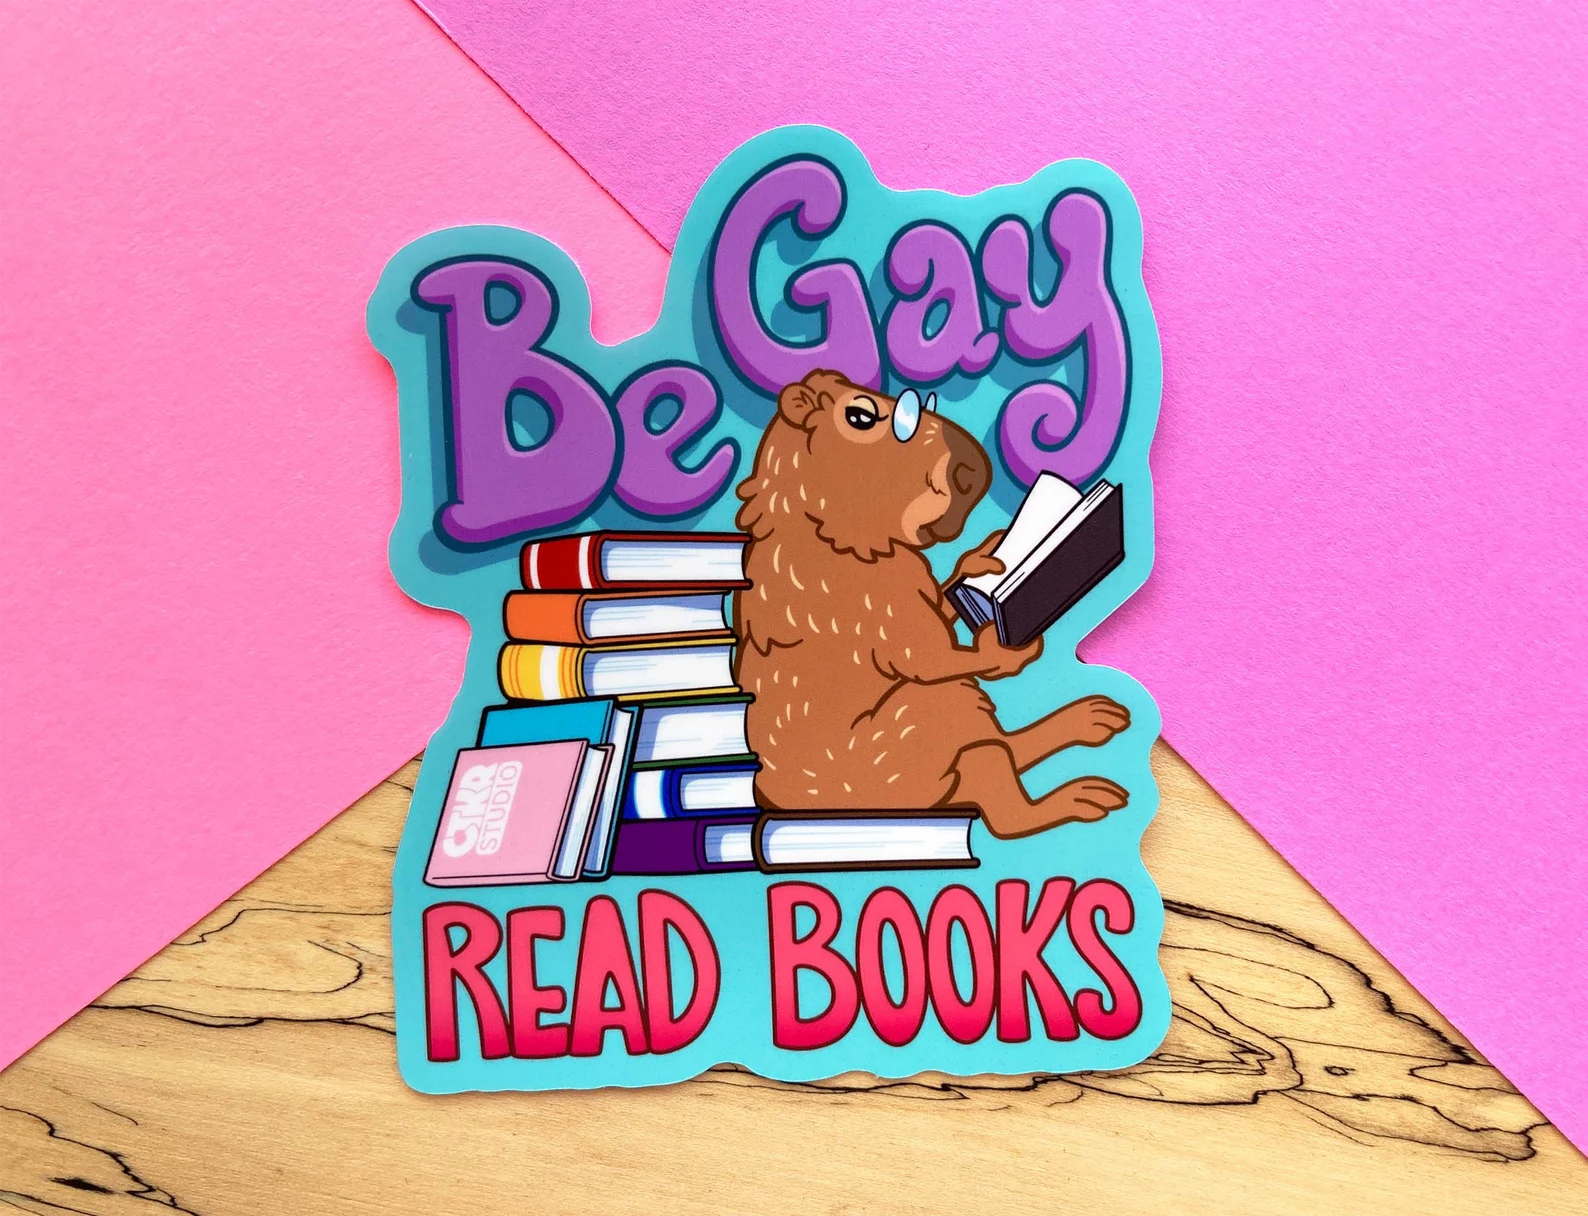 A colorful sticker that reads "be gay, read books" and depicts a reading capybara with a stack of rainbow colored books